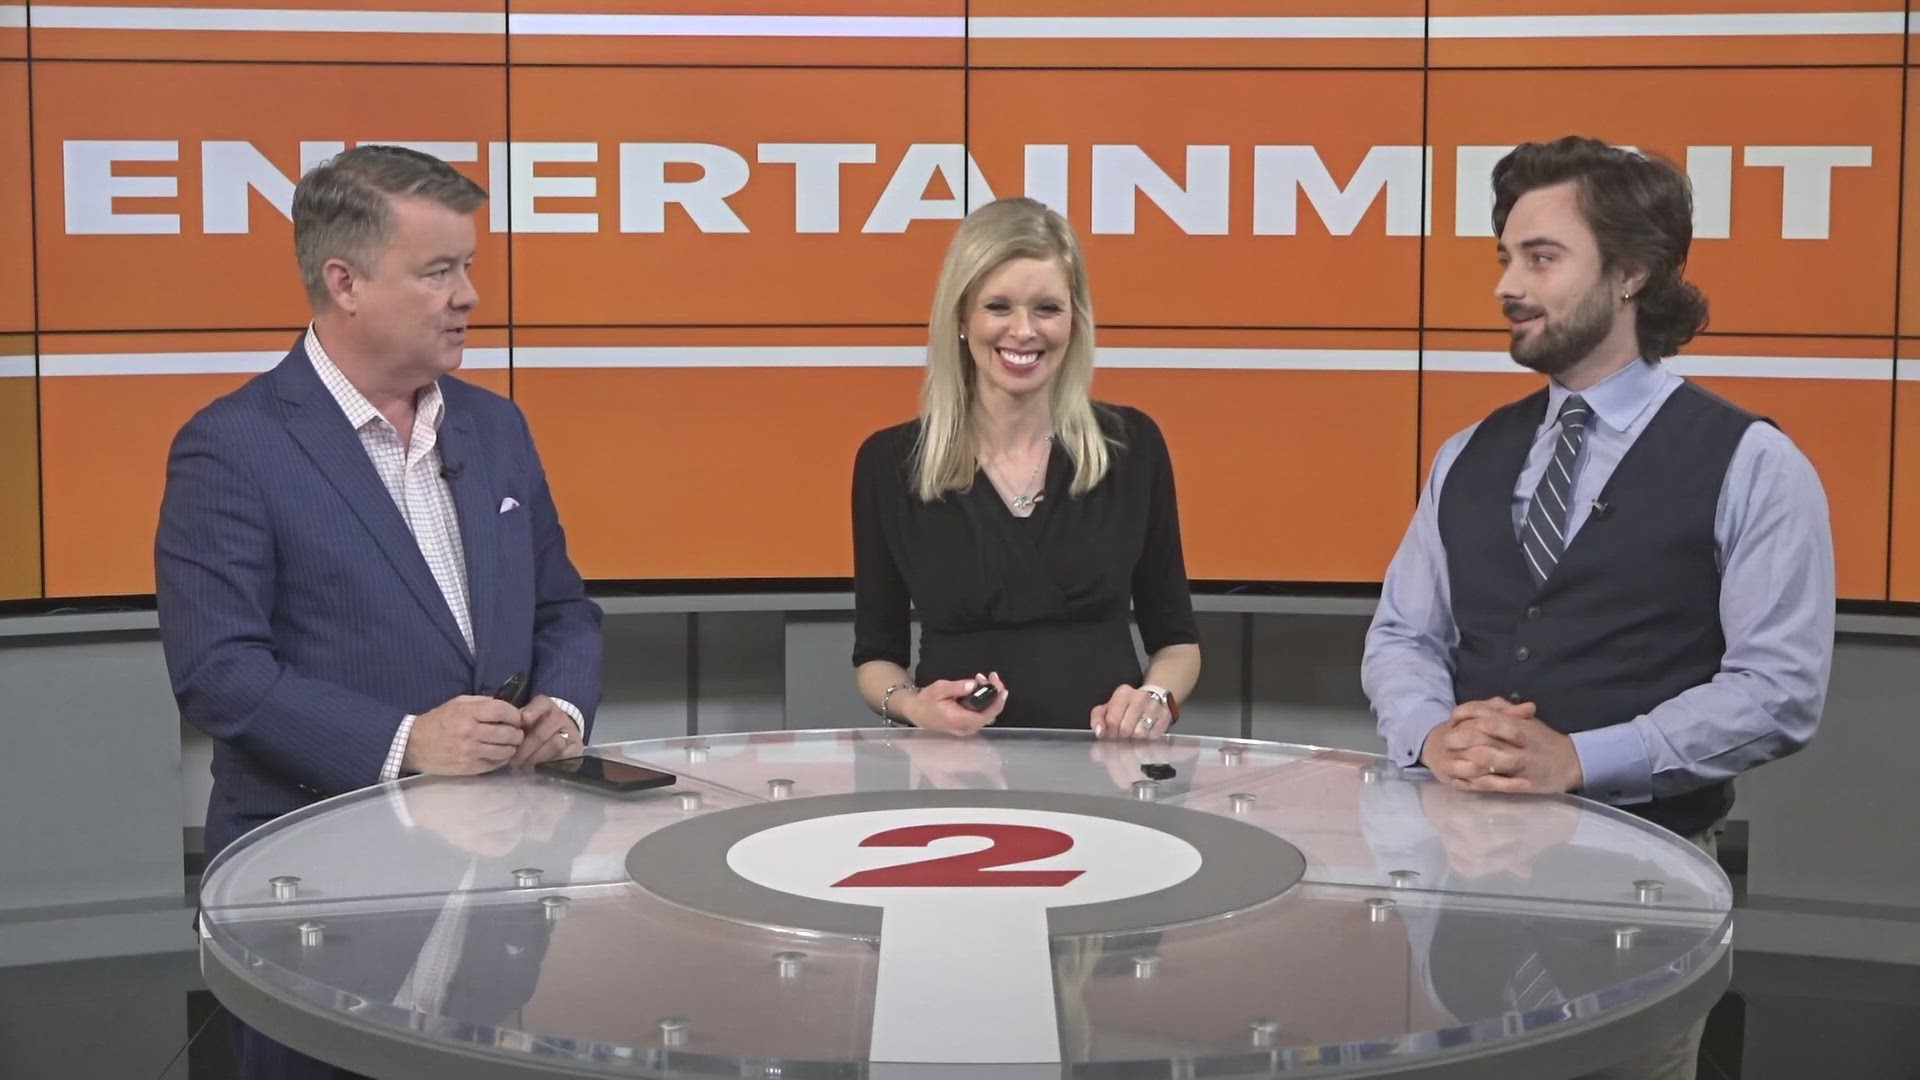 WFMY News 2’s Manning Franks gives viewers a preview of “The Ministry of Ungentlemanly”, “Rebel Moon Part Two: The Scargiver”, and a new movie coming out soon “Trap”